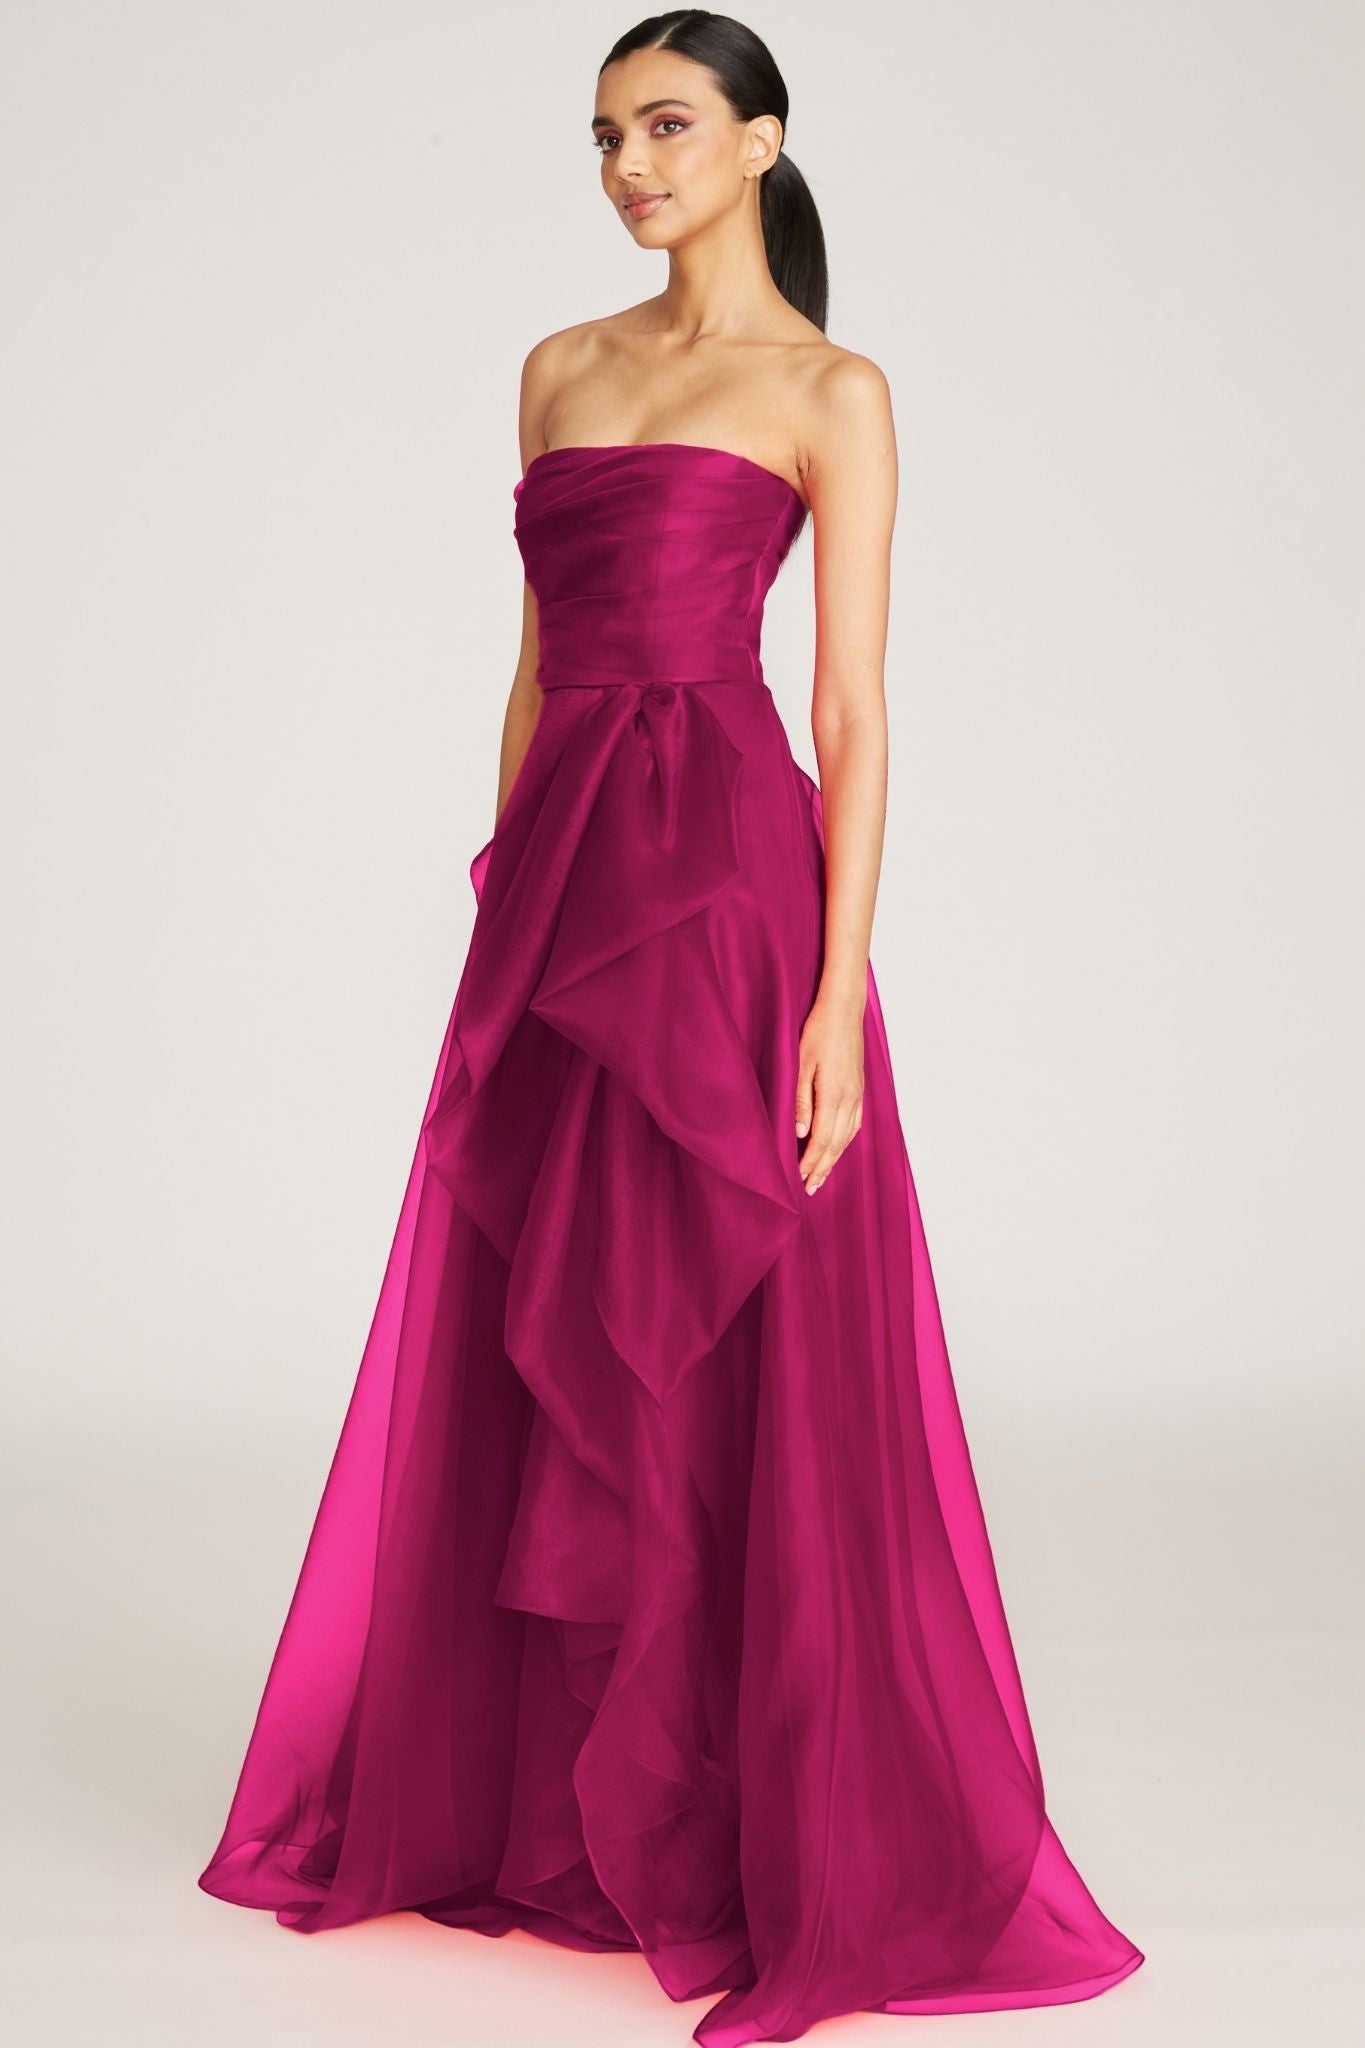 Sangria Organza Gown by Theia Couture - RENTAL